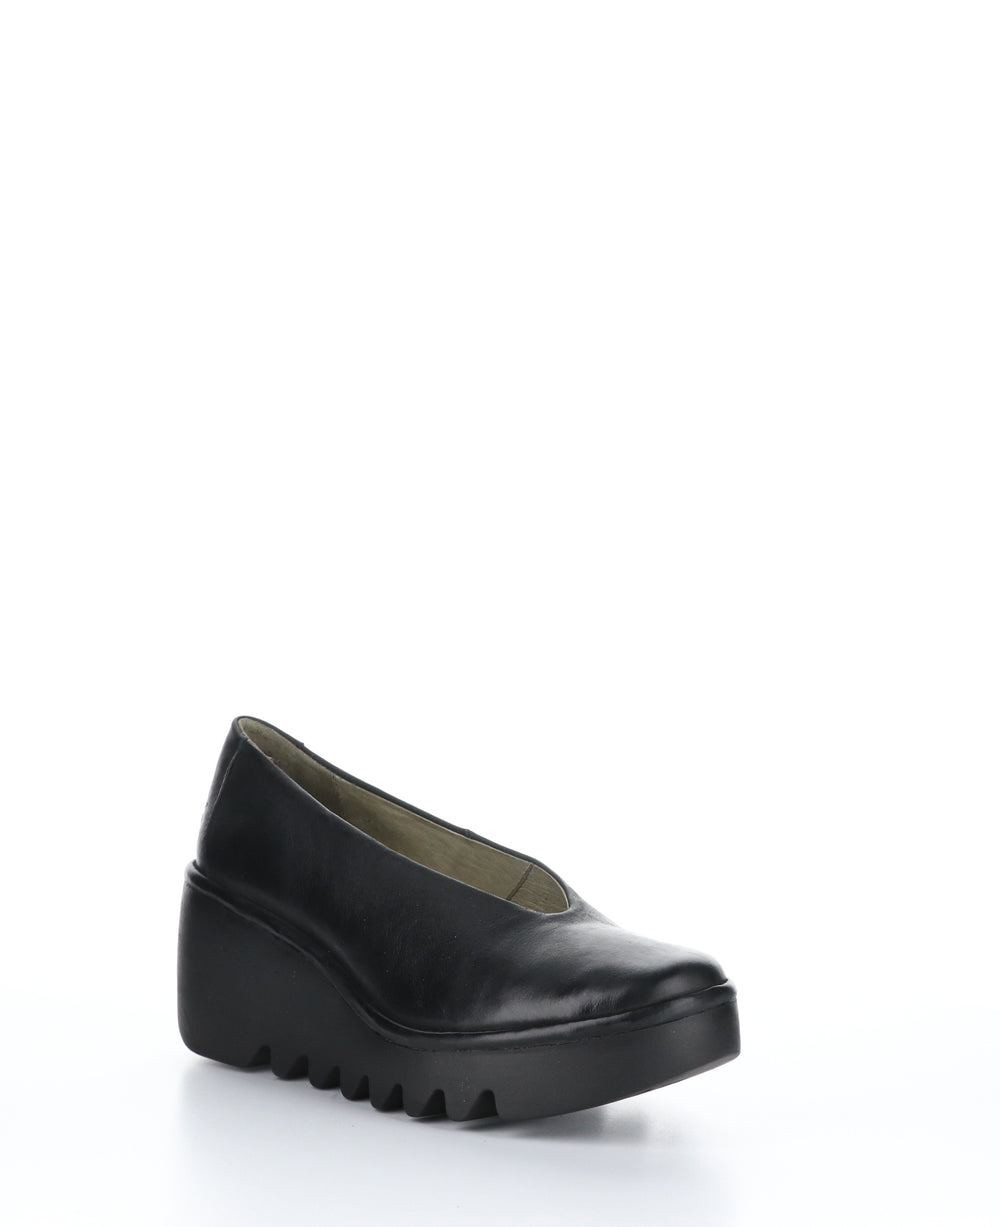 BESO246FLY Verona Black Wedge Shoes|BESO246FLY Chaussures Compensés in Noir